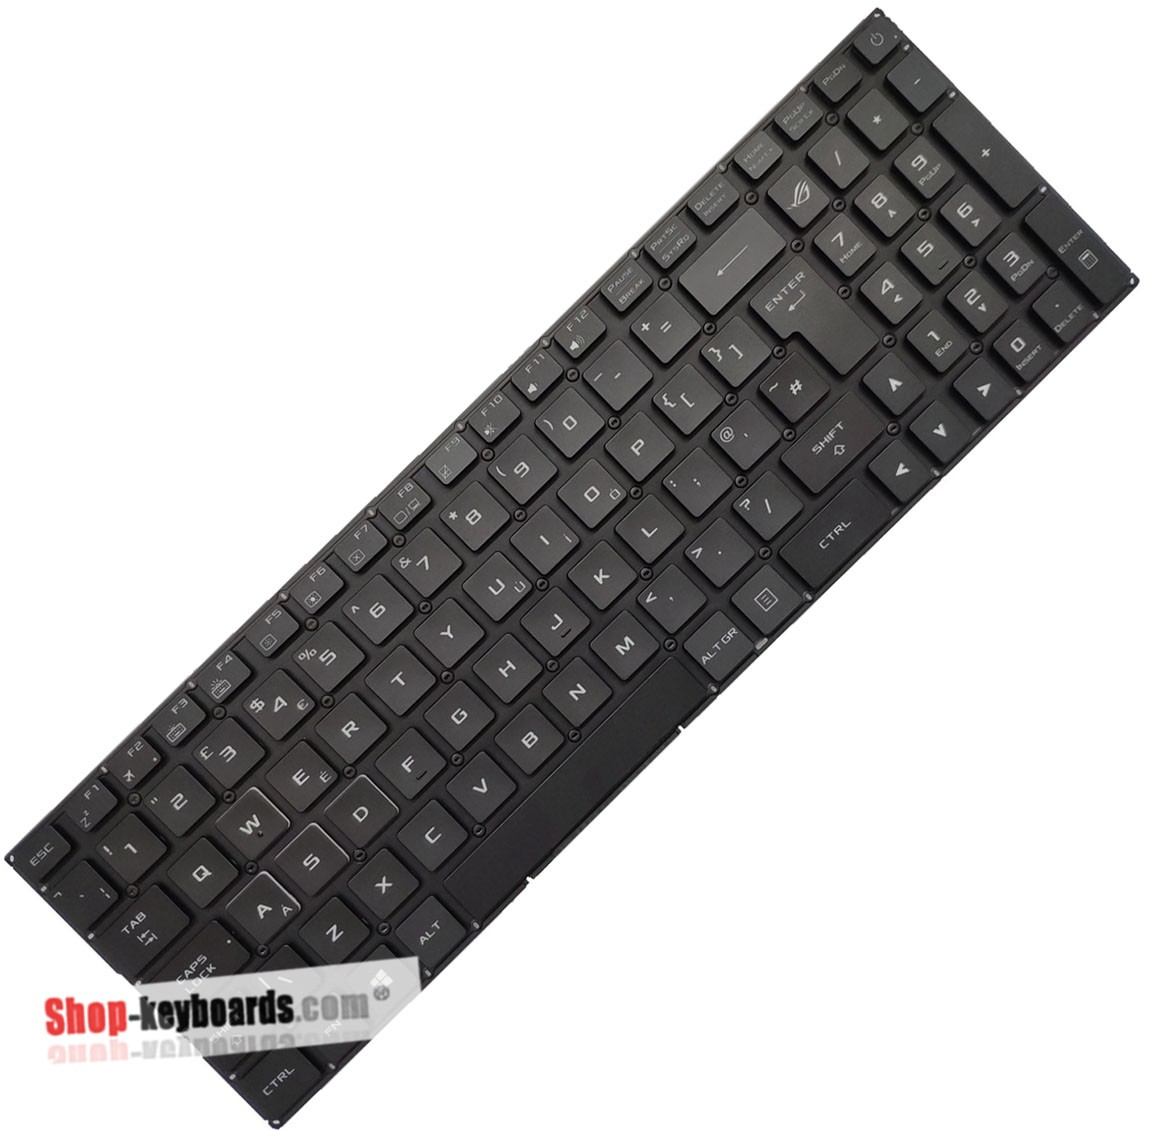 Asus 0KNB0-662PIT00 Keyboard replacement